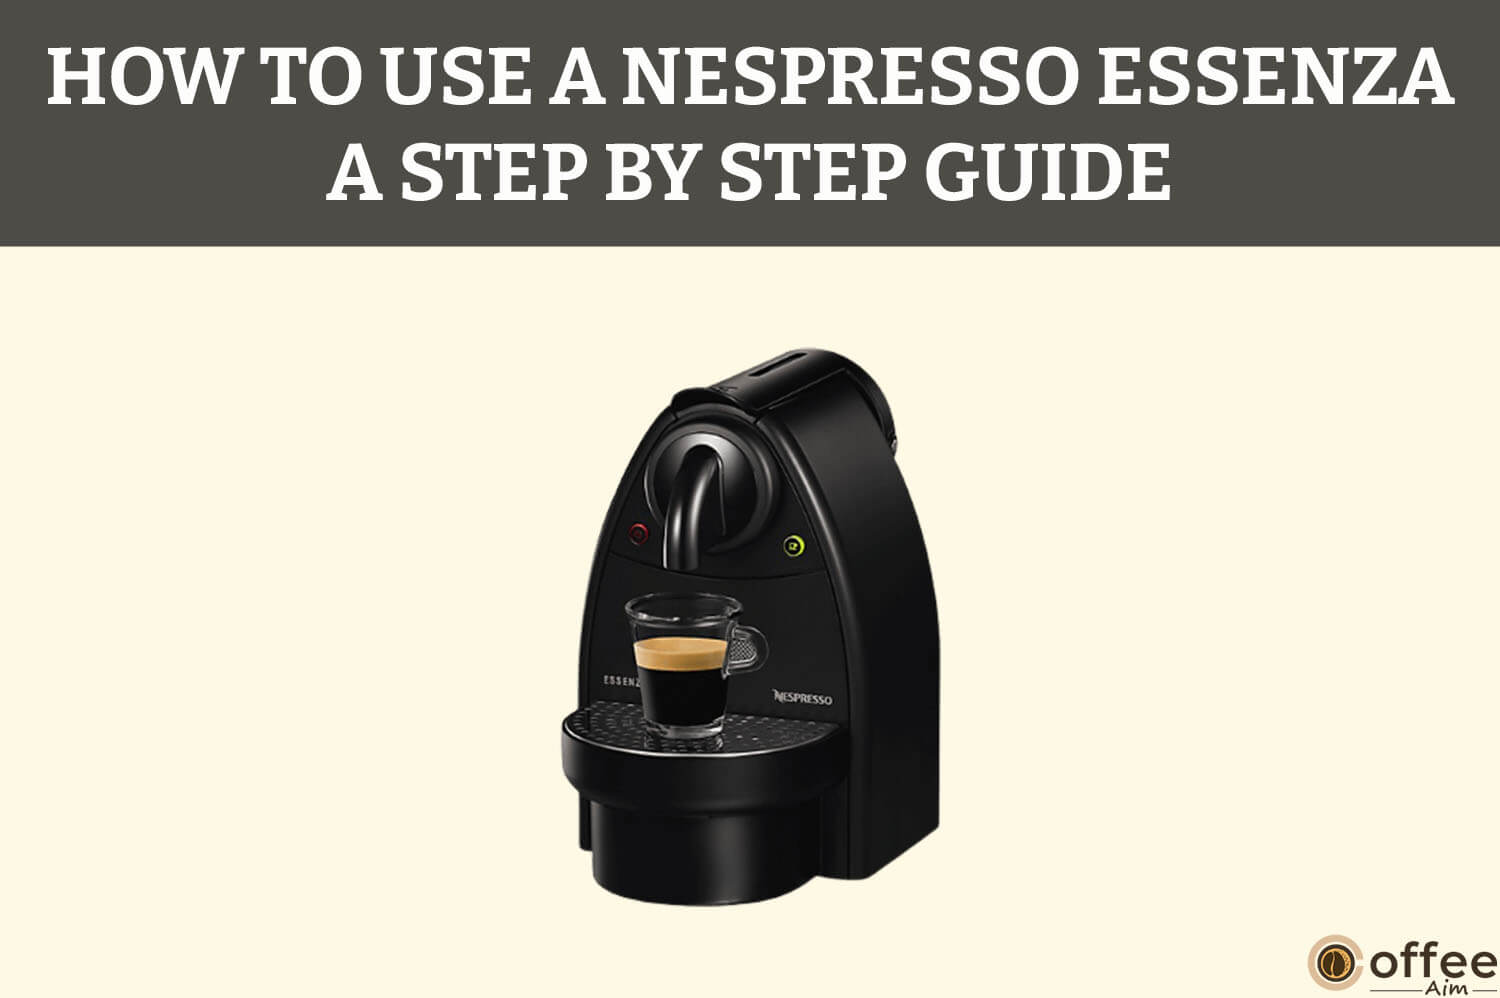 Featured image for the article "How to Use A Nespresso Essenza - A Step by Step Guide"